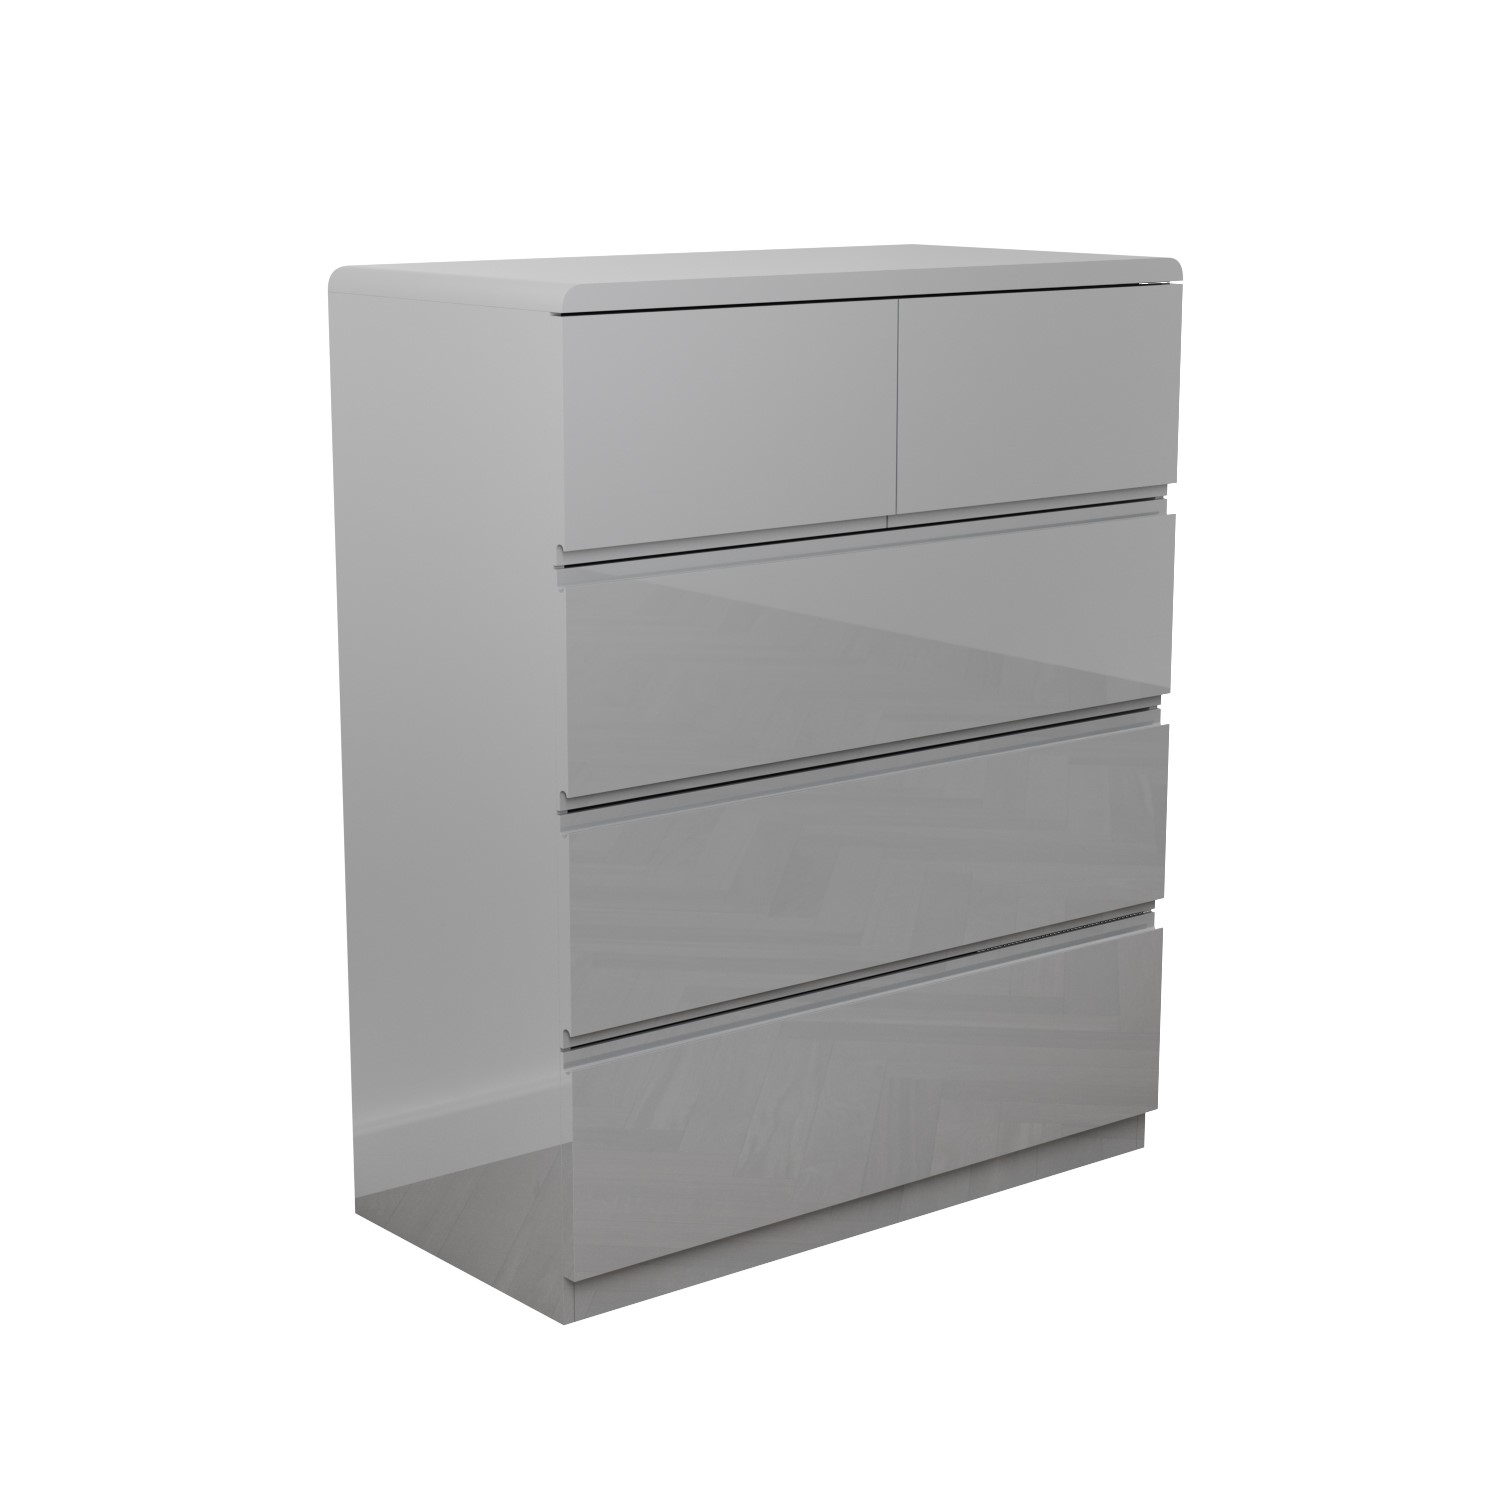 Read more about Small 5 drawer chest of drawers in grey gloss lyra